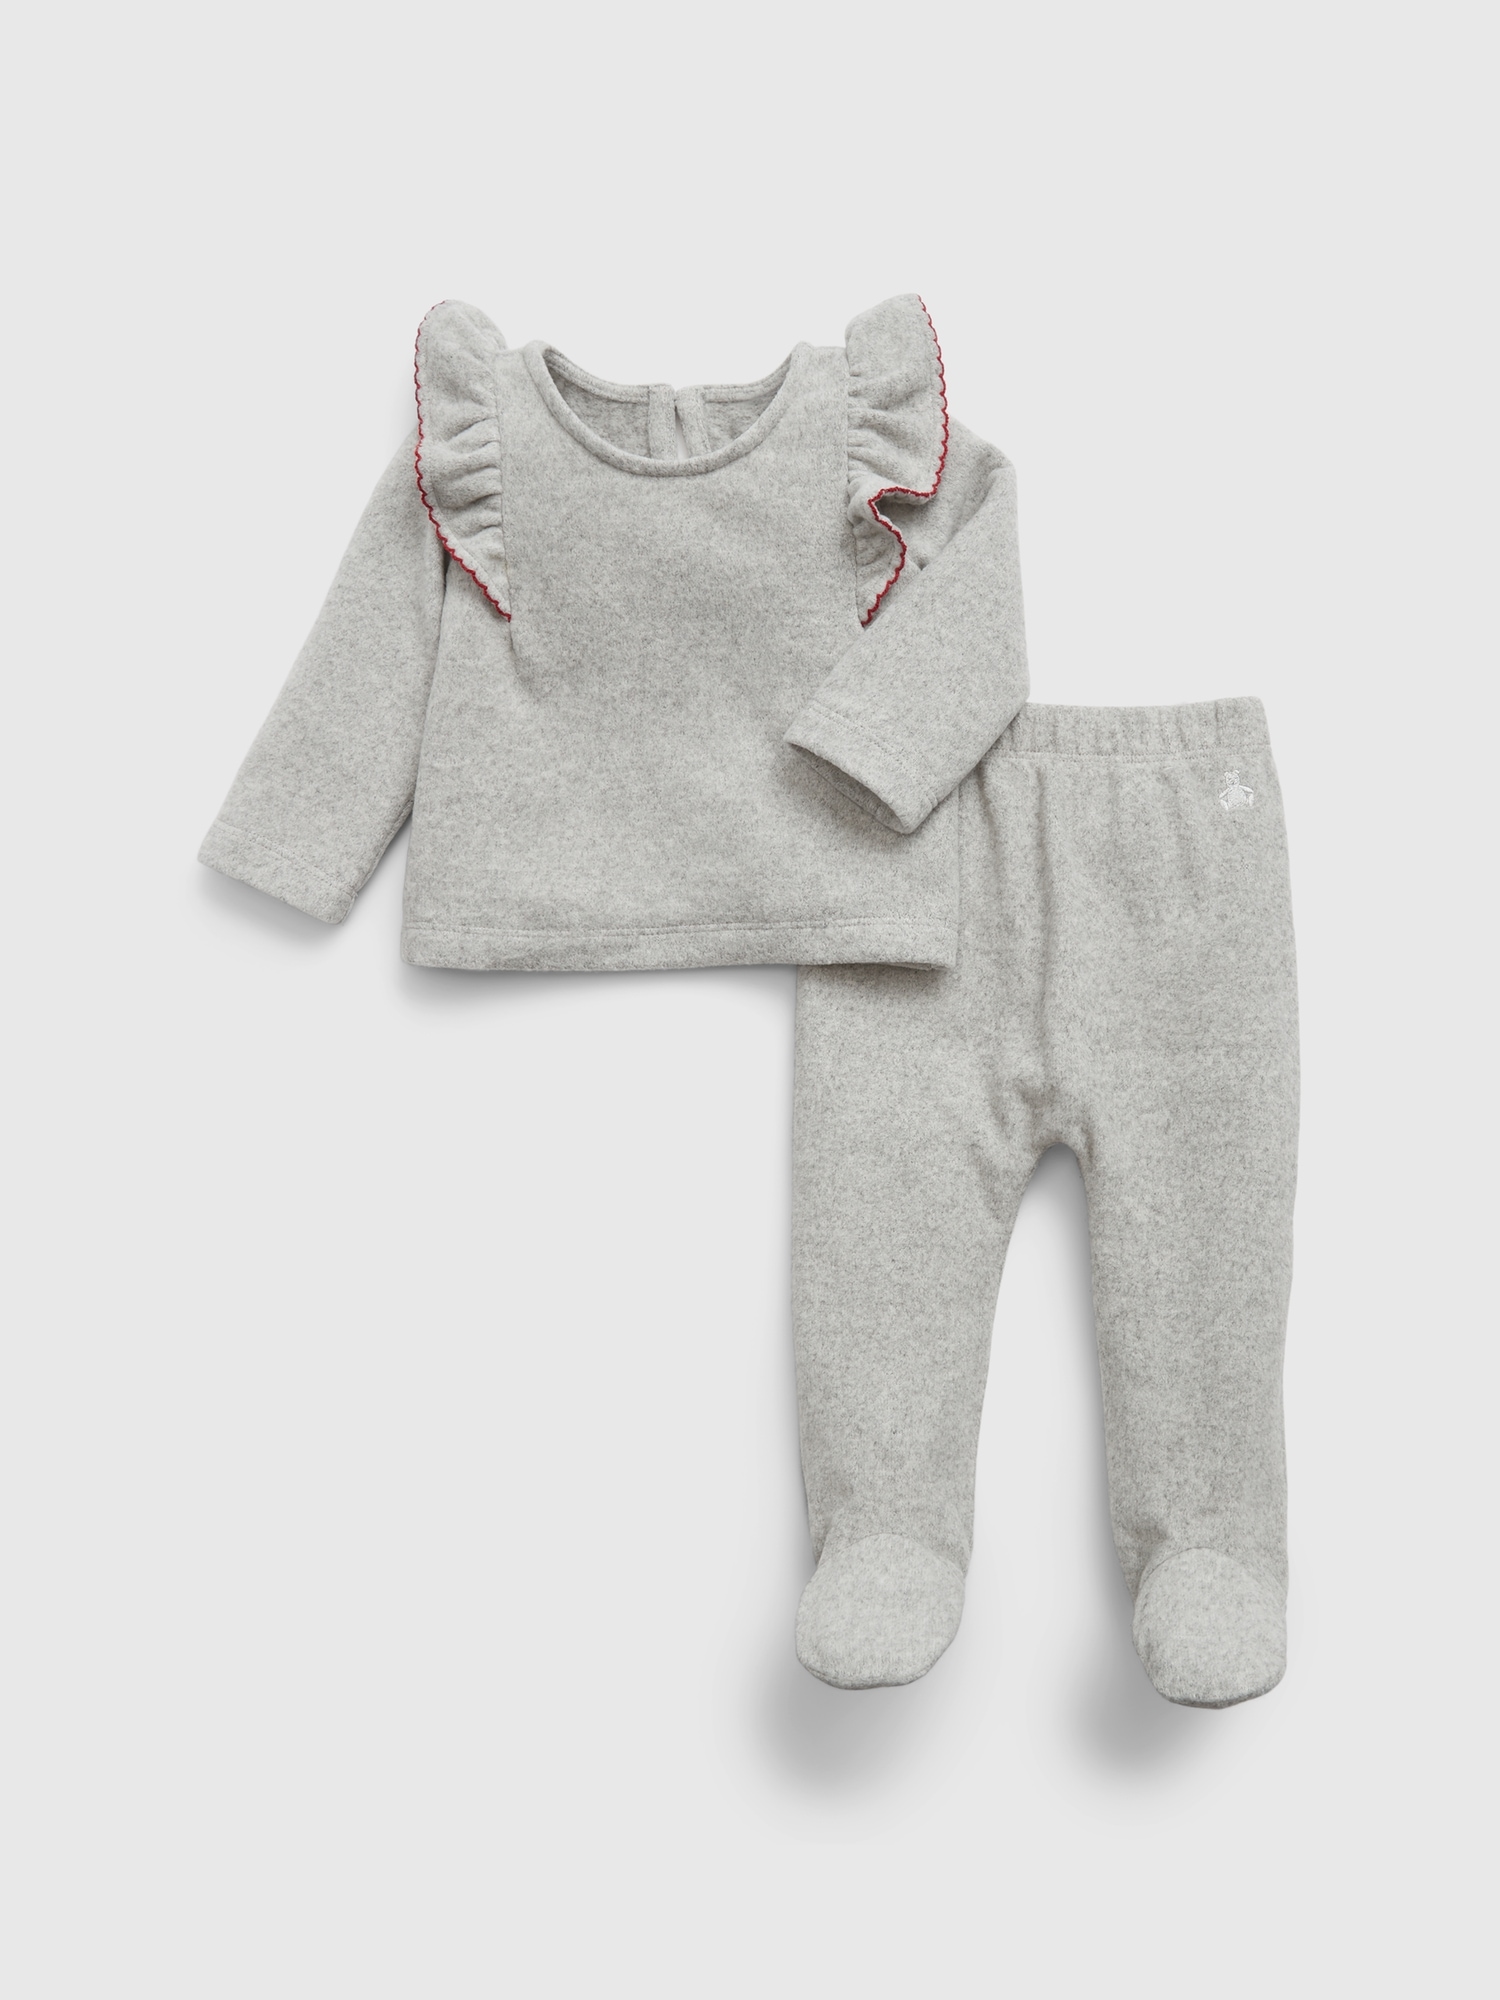 Baby First Favorites Outfit Set